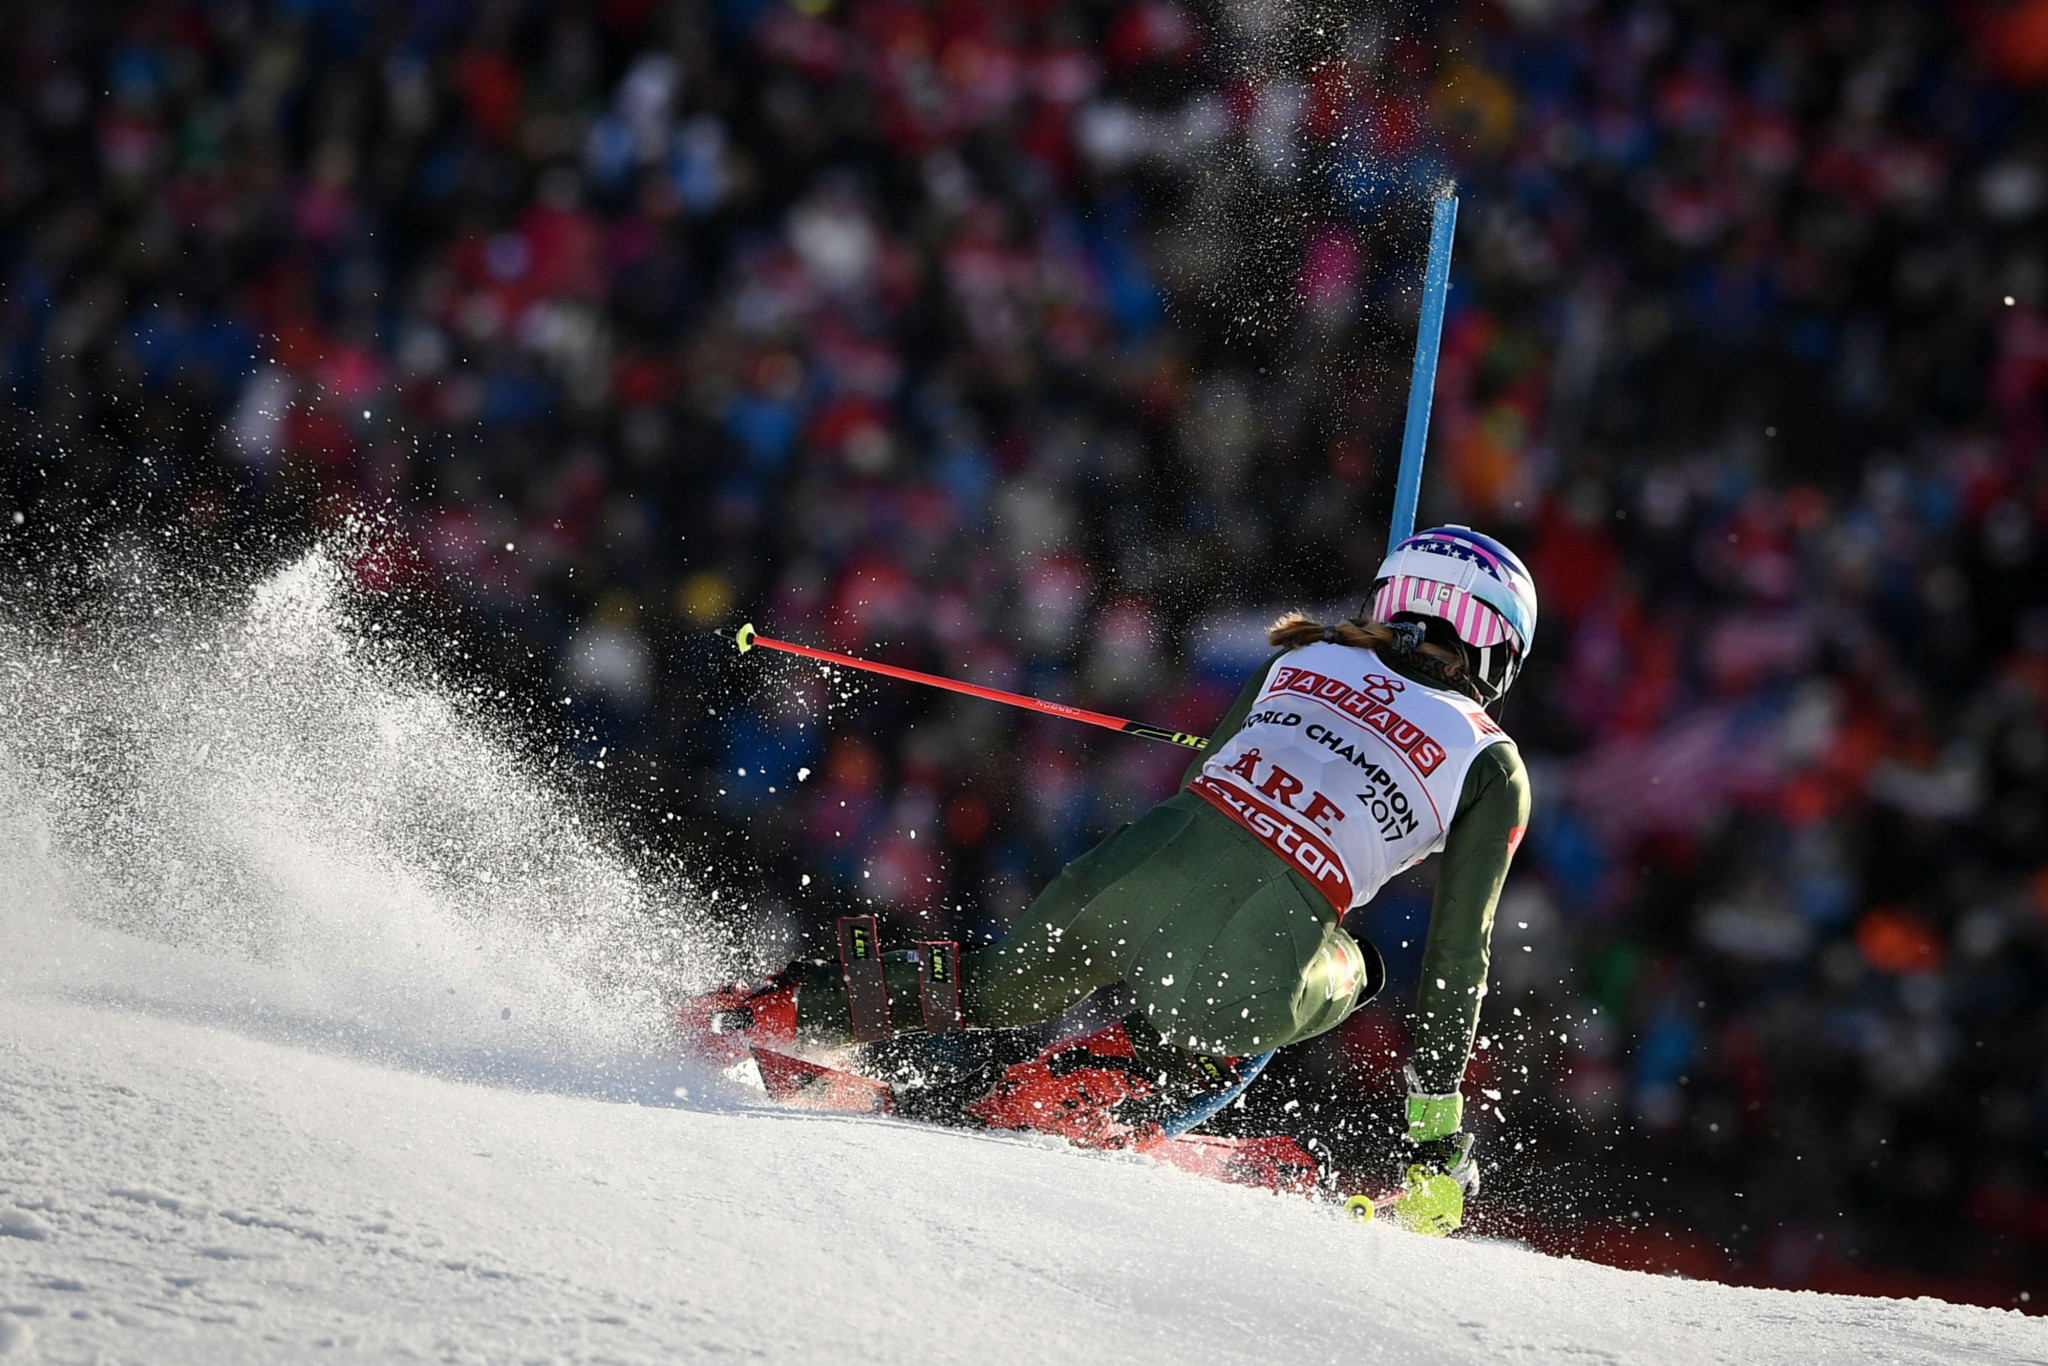 Mikaela Shiffrin impressed in the second run to move to the top of the standings ©Getty Images